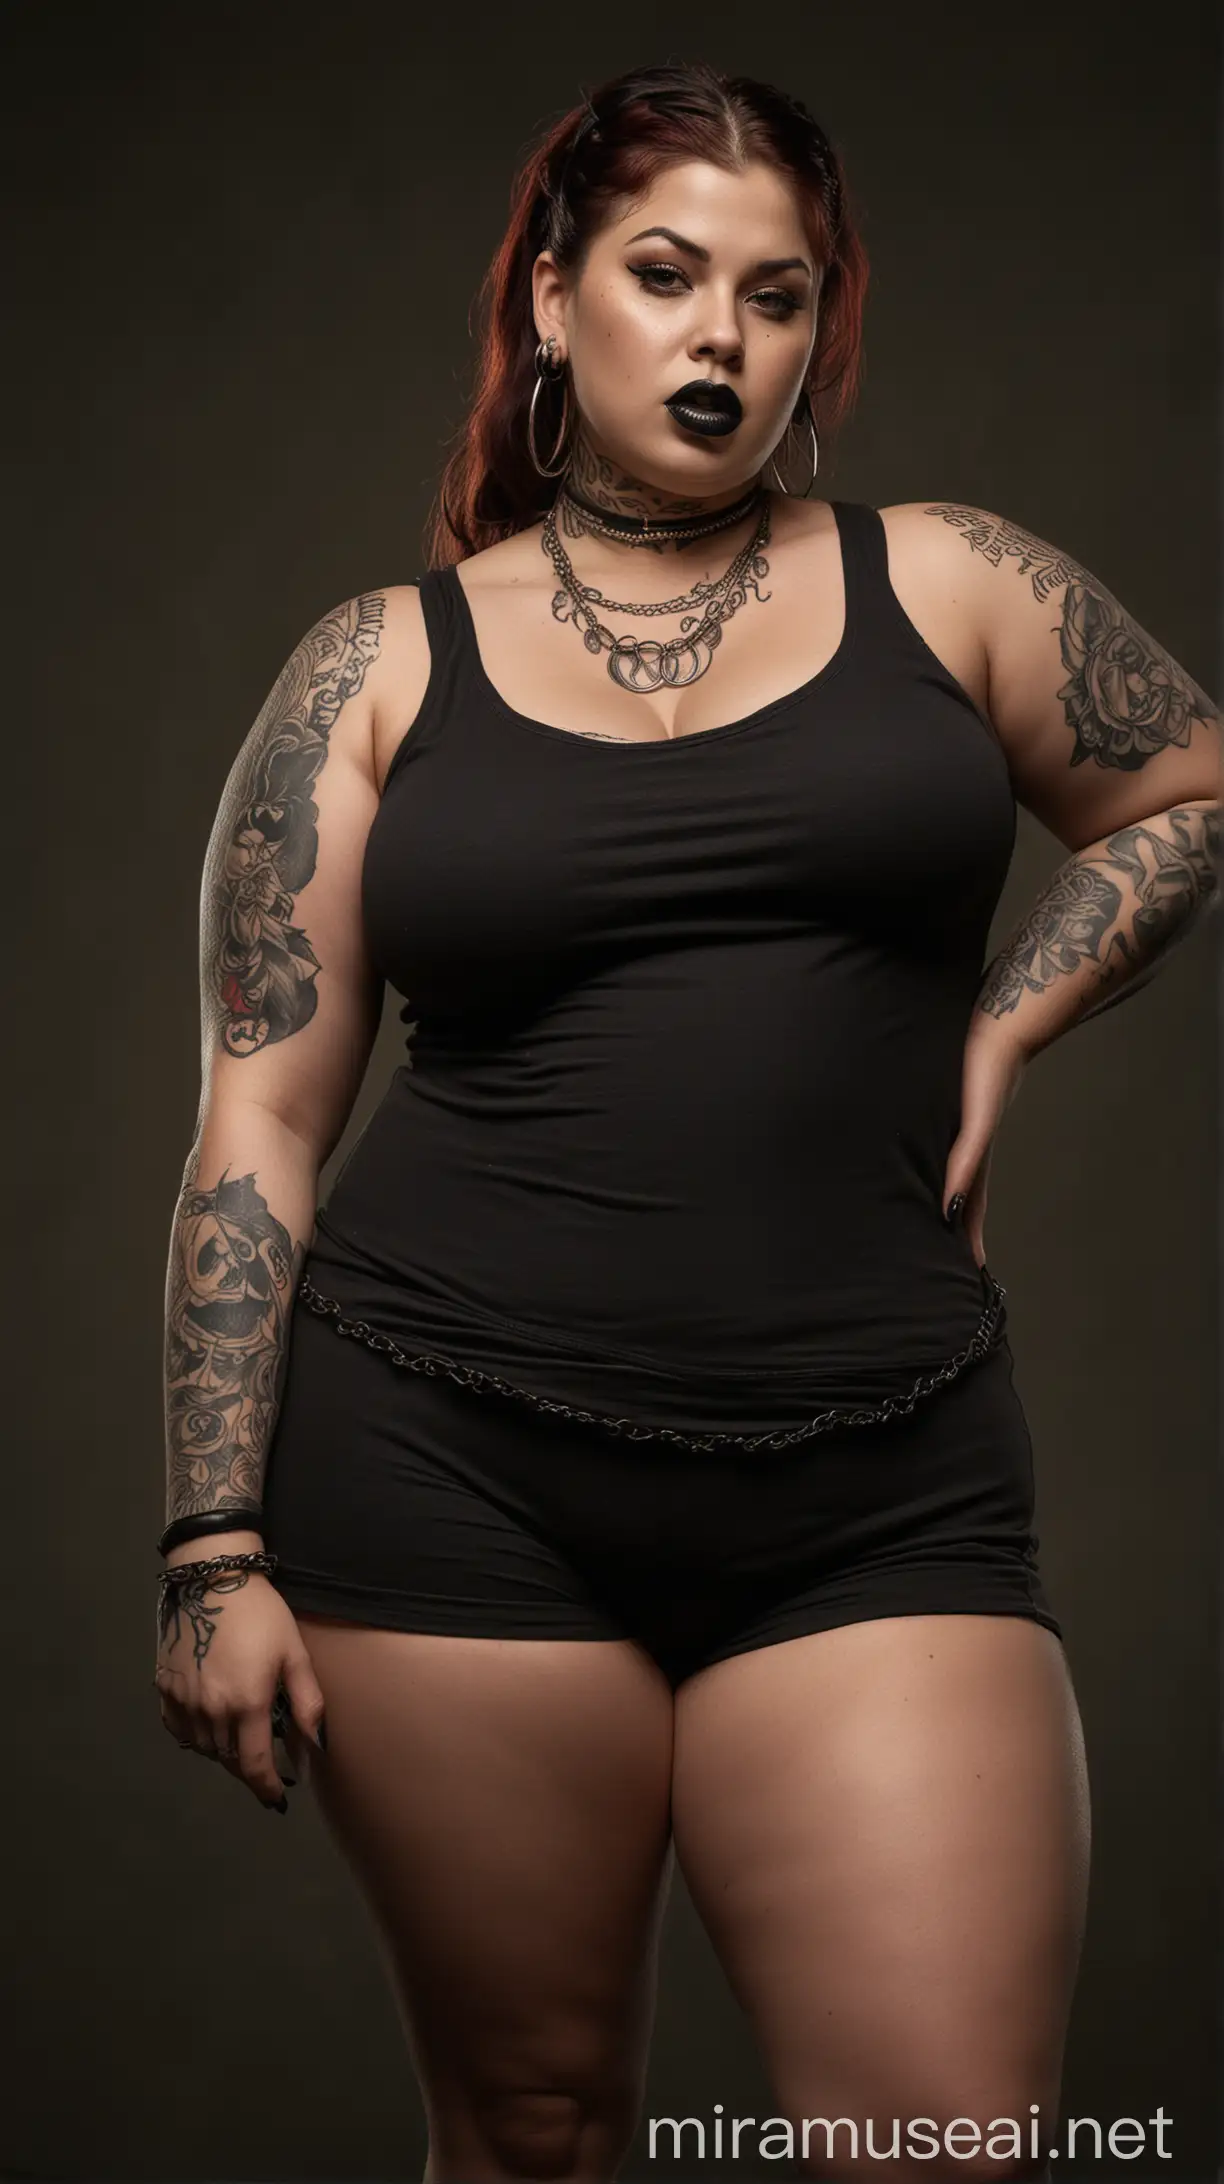 Intense Portrait of a Tattooed Chola Woman in a Dramatic Renaissance Pose